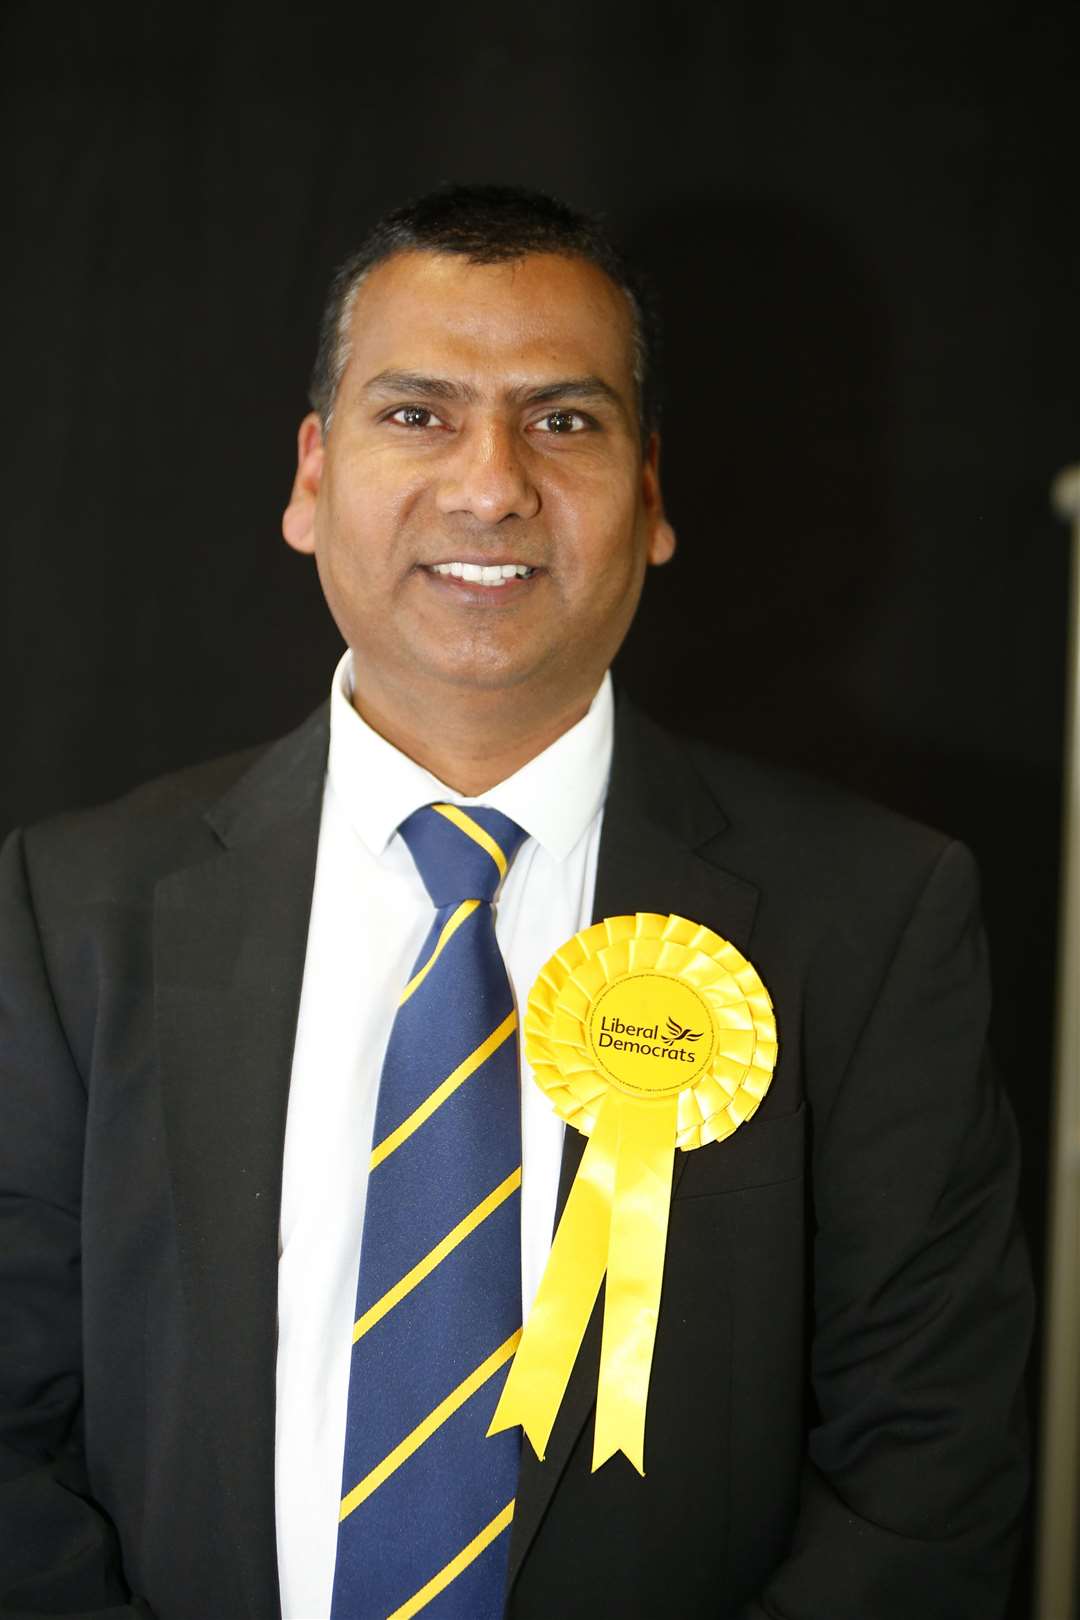 Dinesh Khadka newly elected for the Lib Dems in Fant Ward